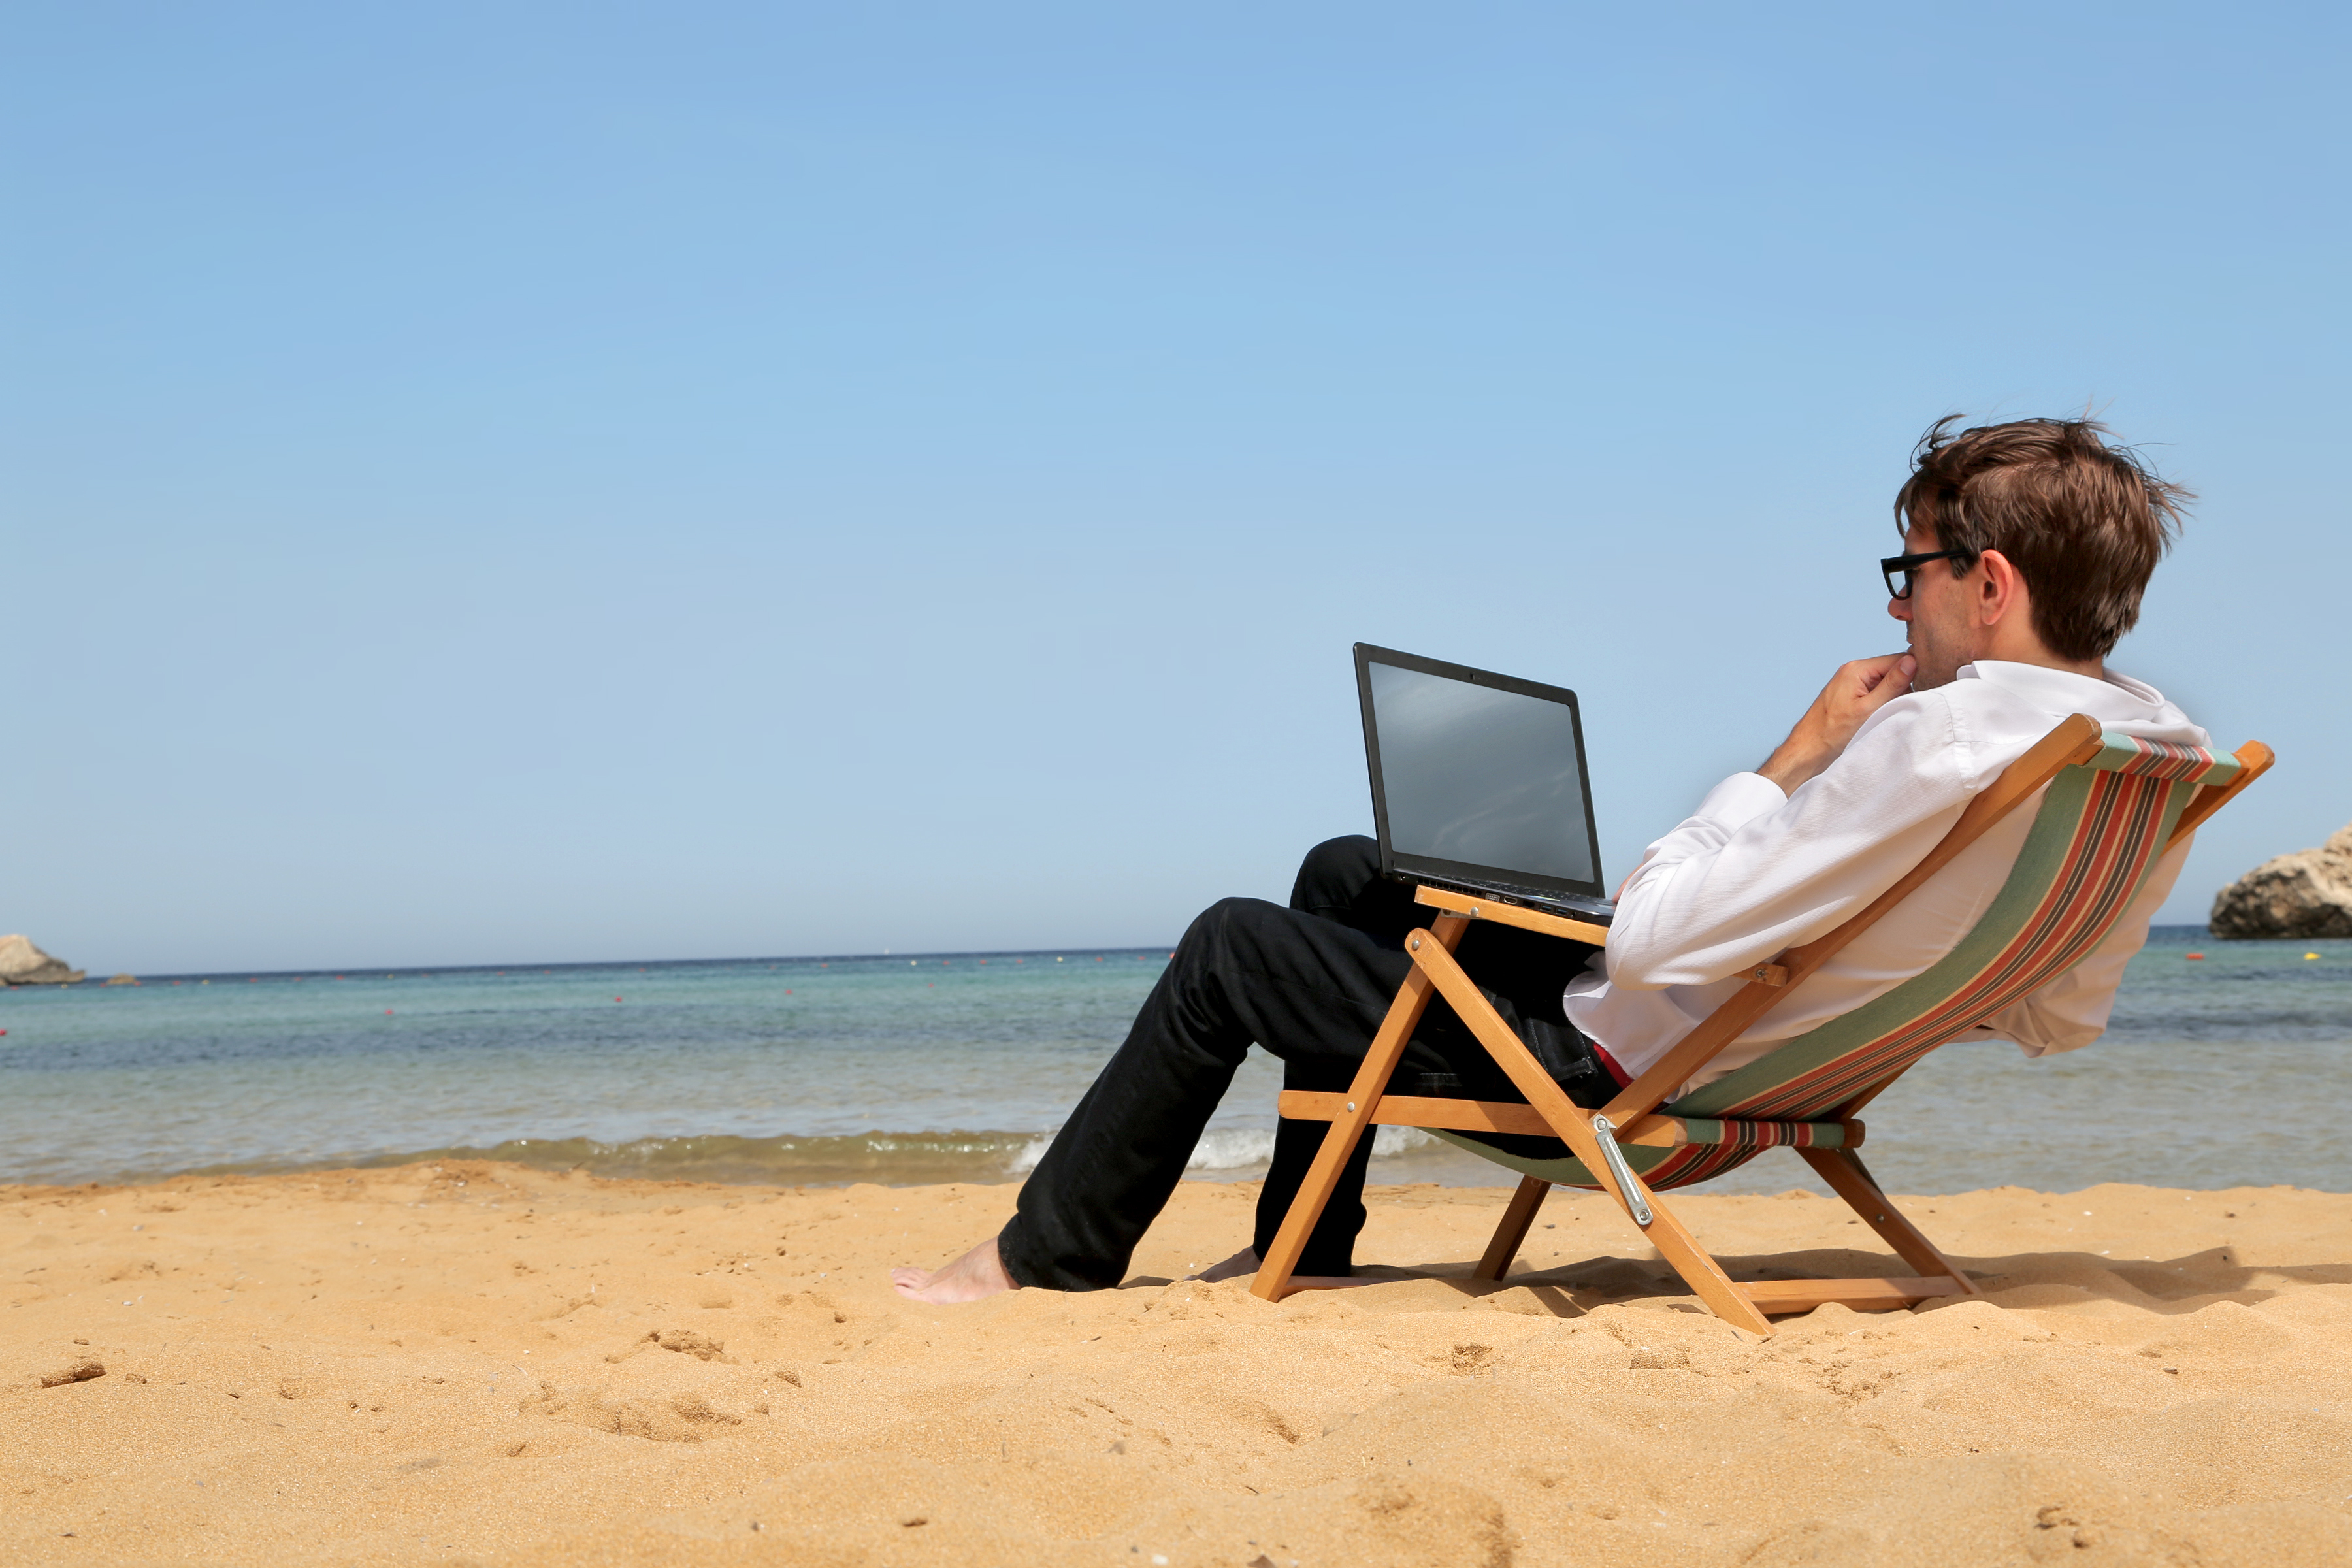 Small business owners can use summer months to get ahead